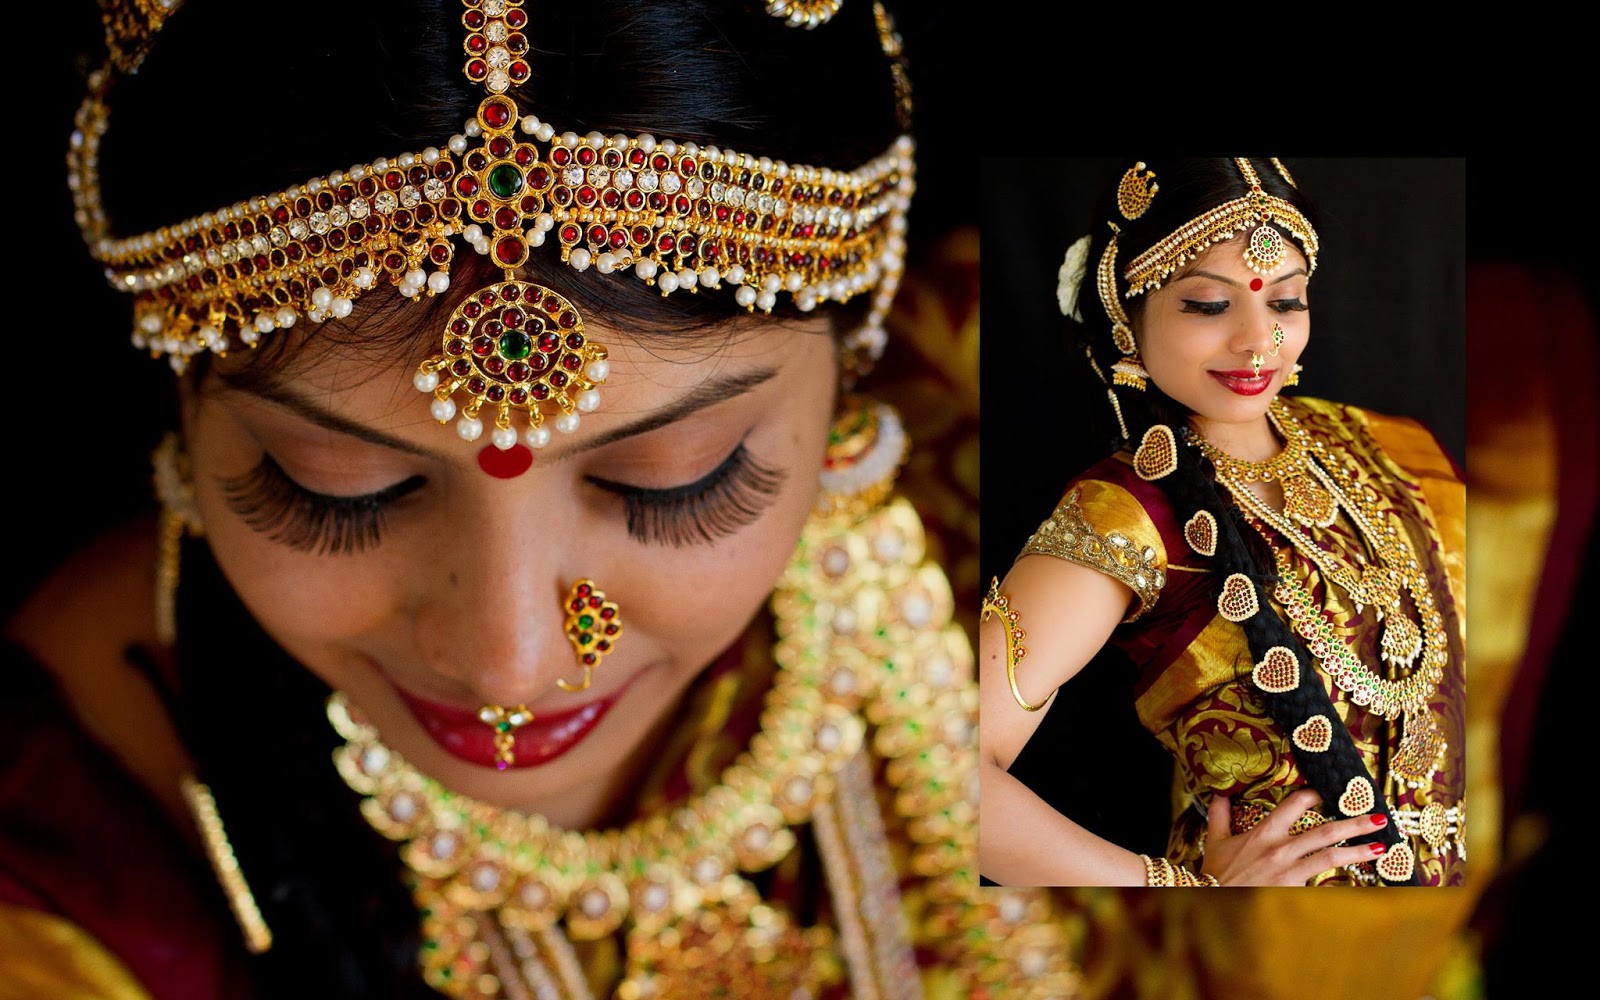 South Indian Bride, Bridal look, Redstone Jewelry, beautiful girl in Indian jewelry 